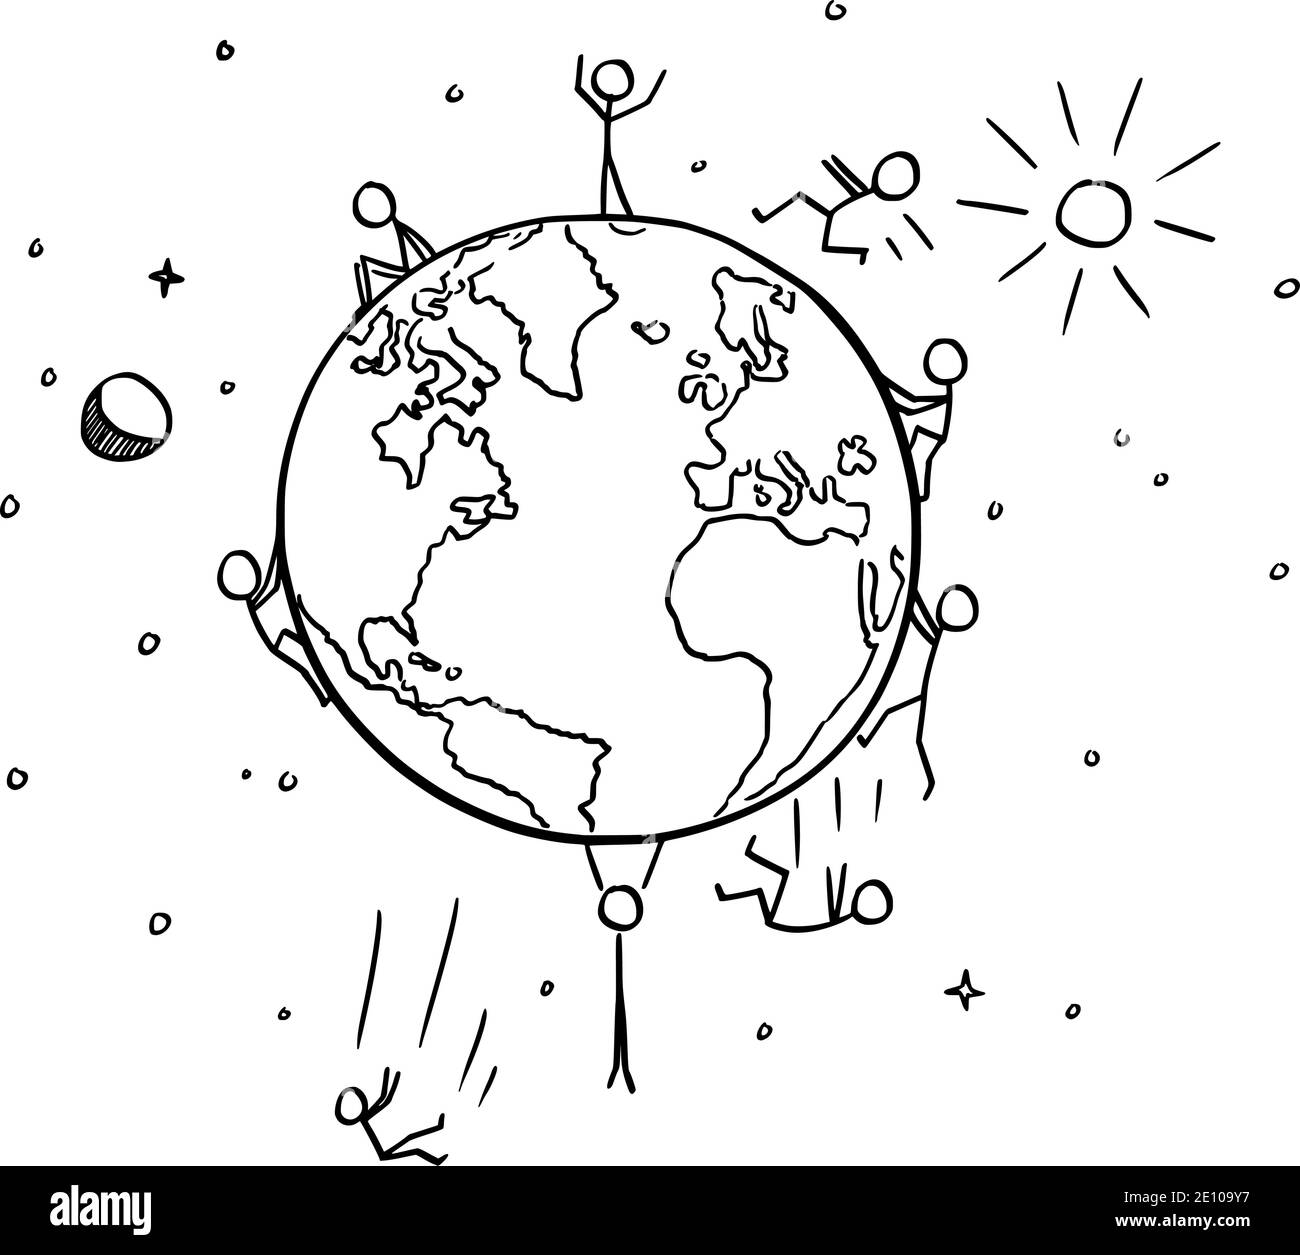 Vector cartoon stick figure illustration of People Falling from spherical planet Earth. Flat Earth conspiracy or theory. Stock Vector